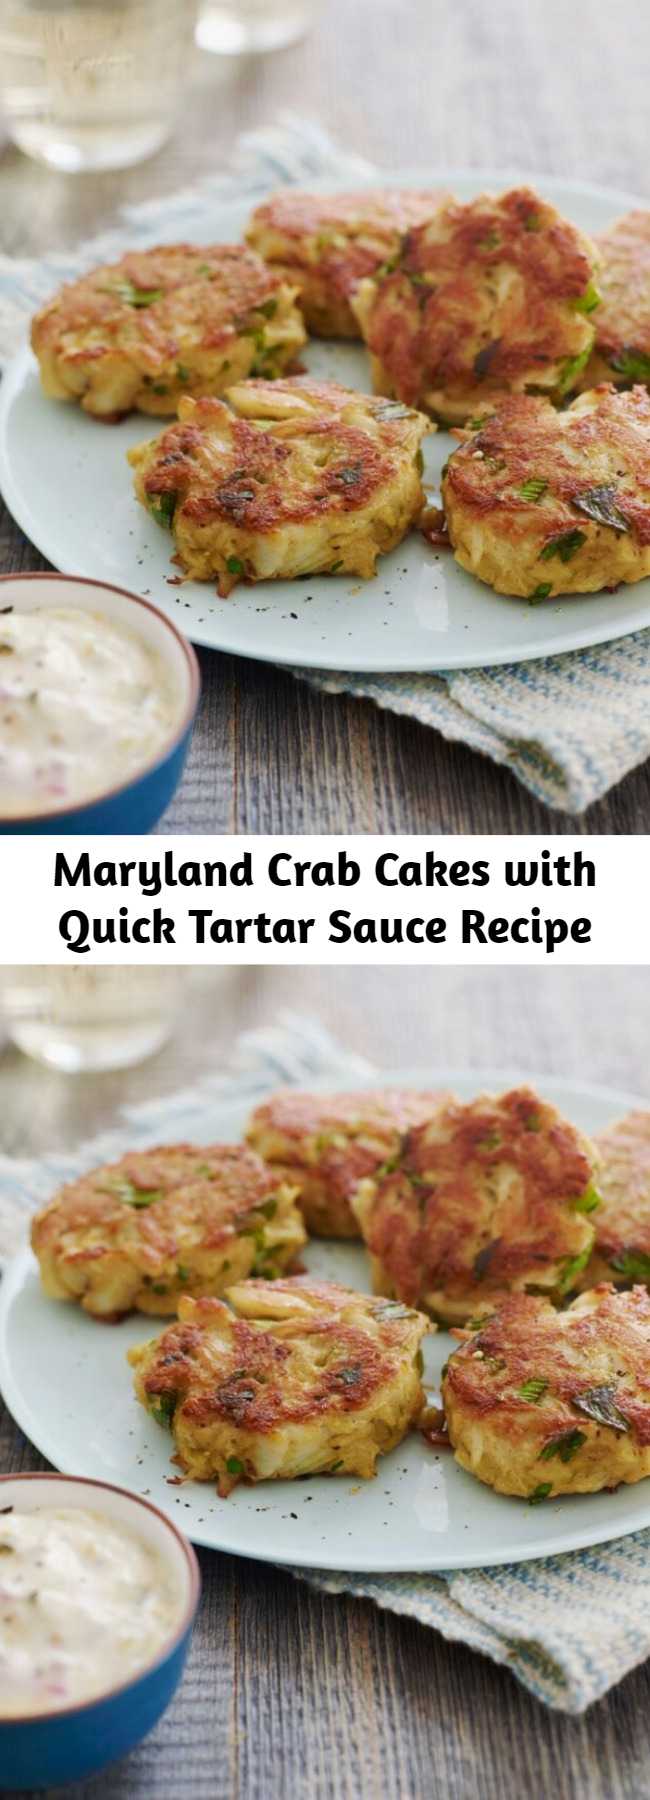 Maryland Crab Cakes with Quick Tartar Sauce Recipe - A Maryland staple, these crab cakes made from fresh lump crab meat and Old Bay are authentic and easy to prepare.